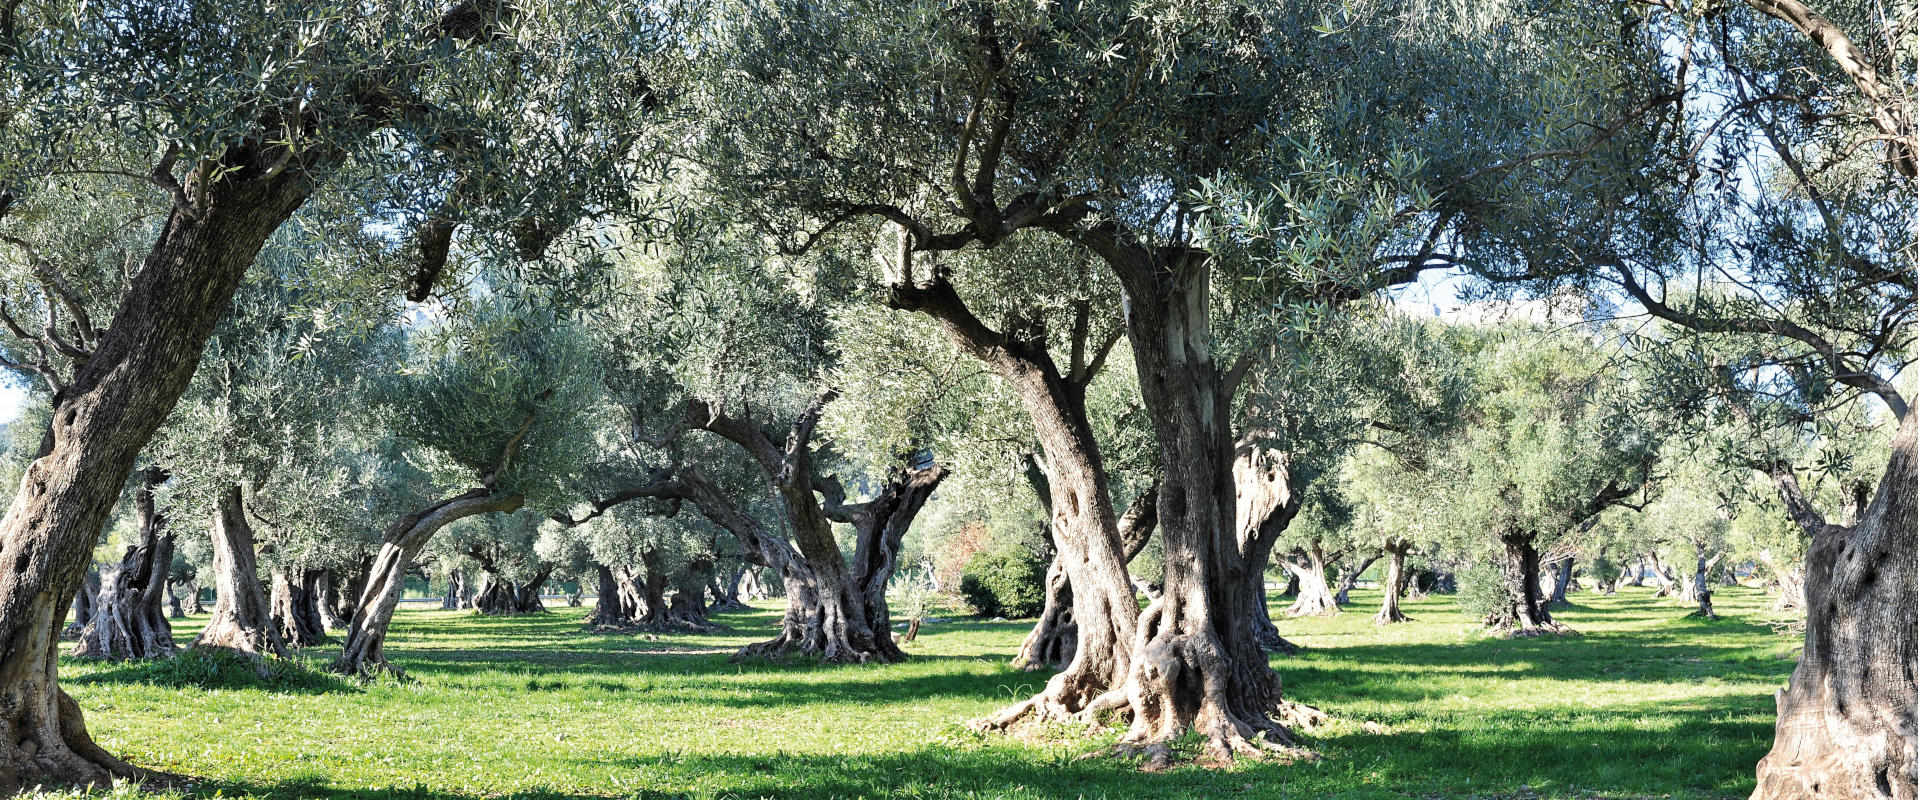 Olive grove with centuries-old olives